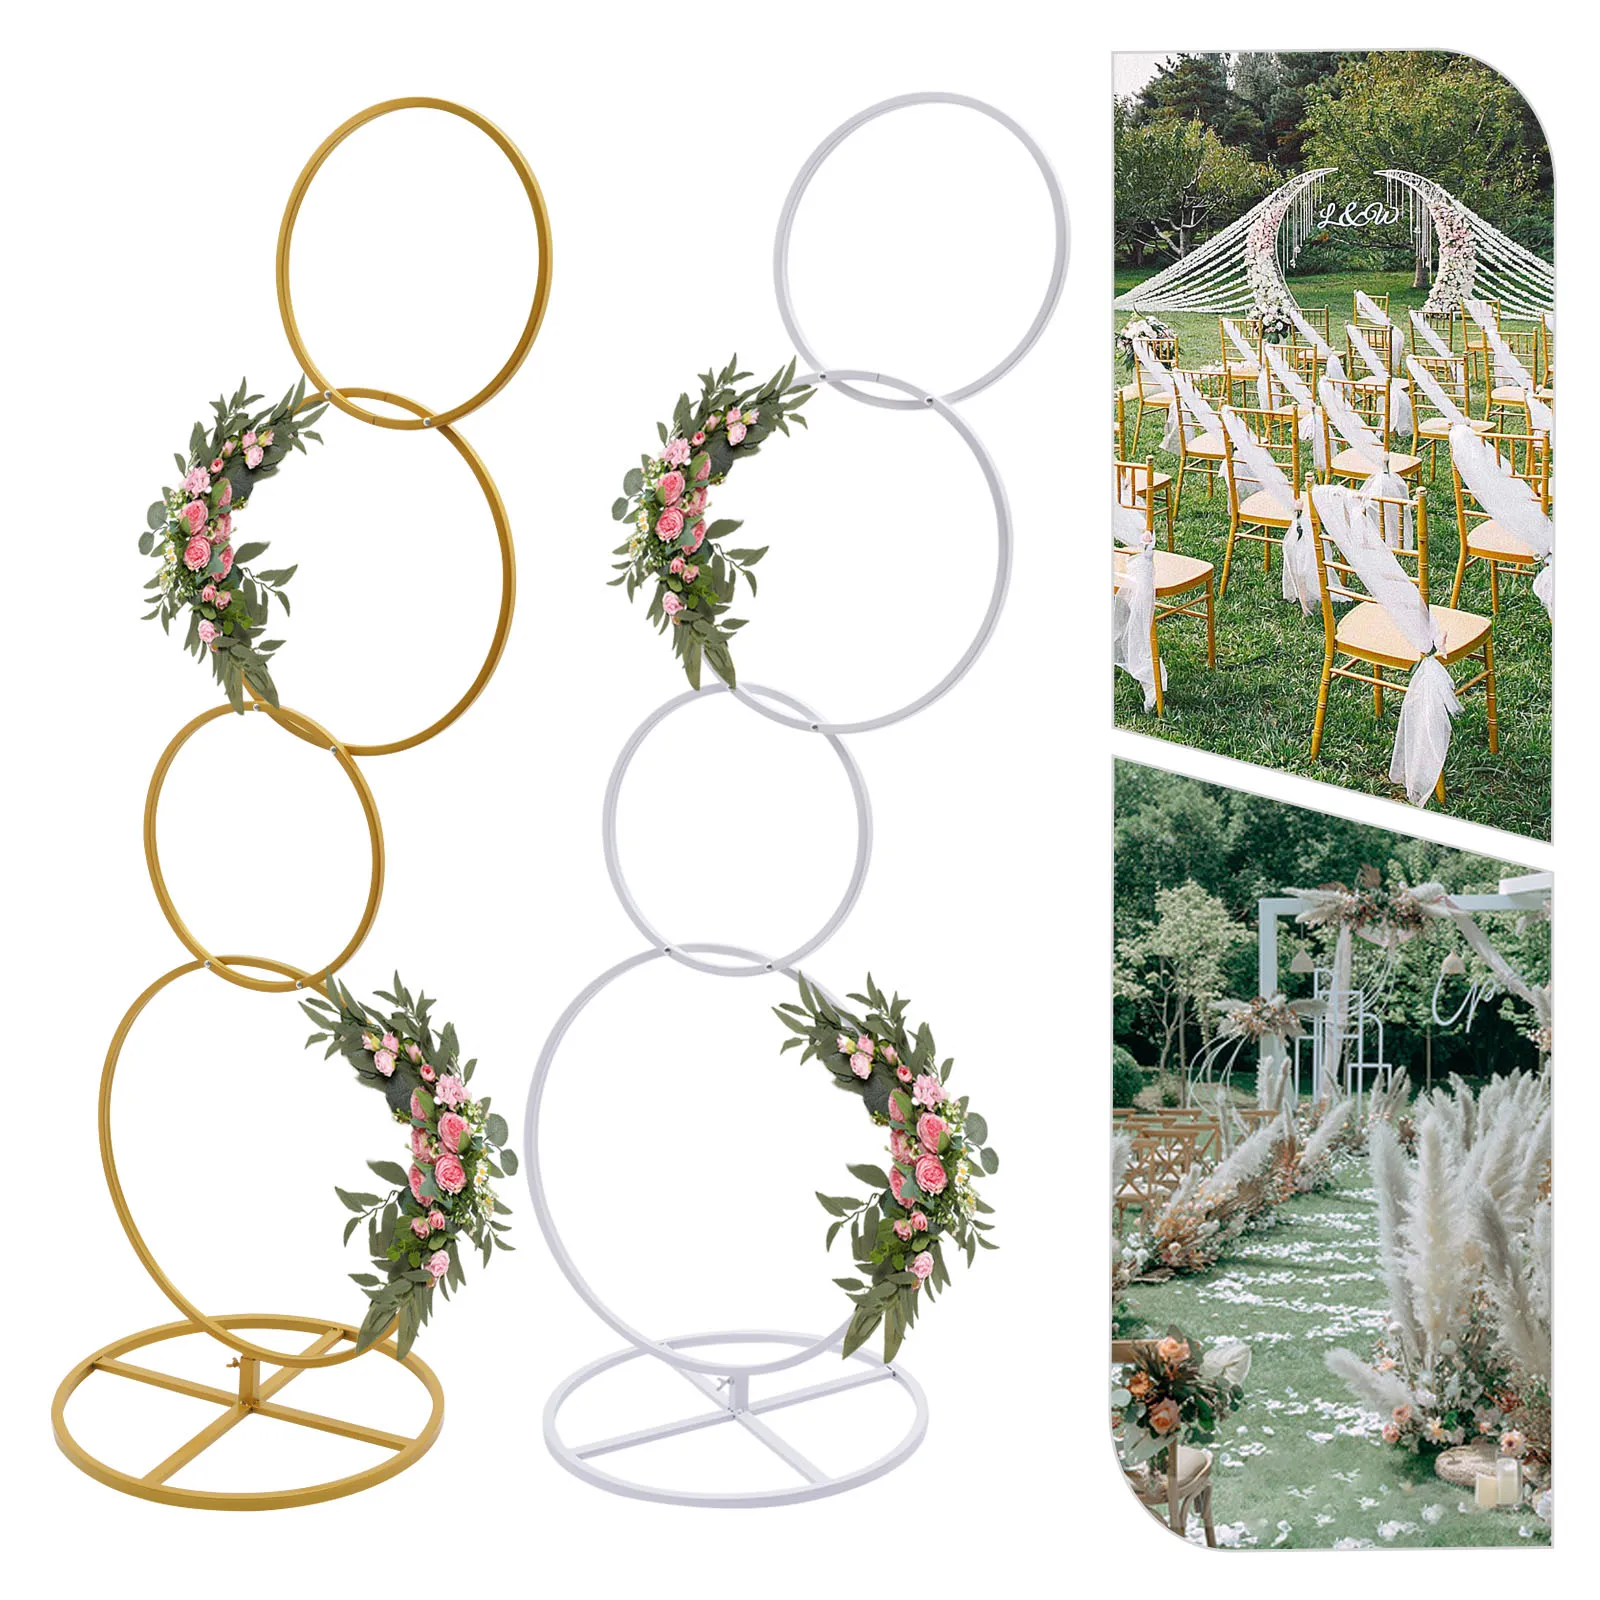 

Wedding Backdrop Stand, Detachable 4 Tier Metal Flower Arch Frame for Photo Aisle Decor, Table Centerpiece (Round/Square or Gold